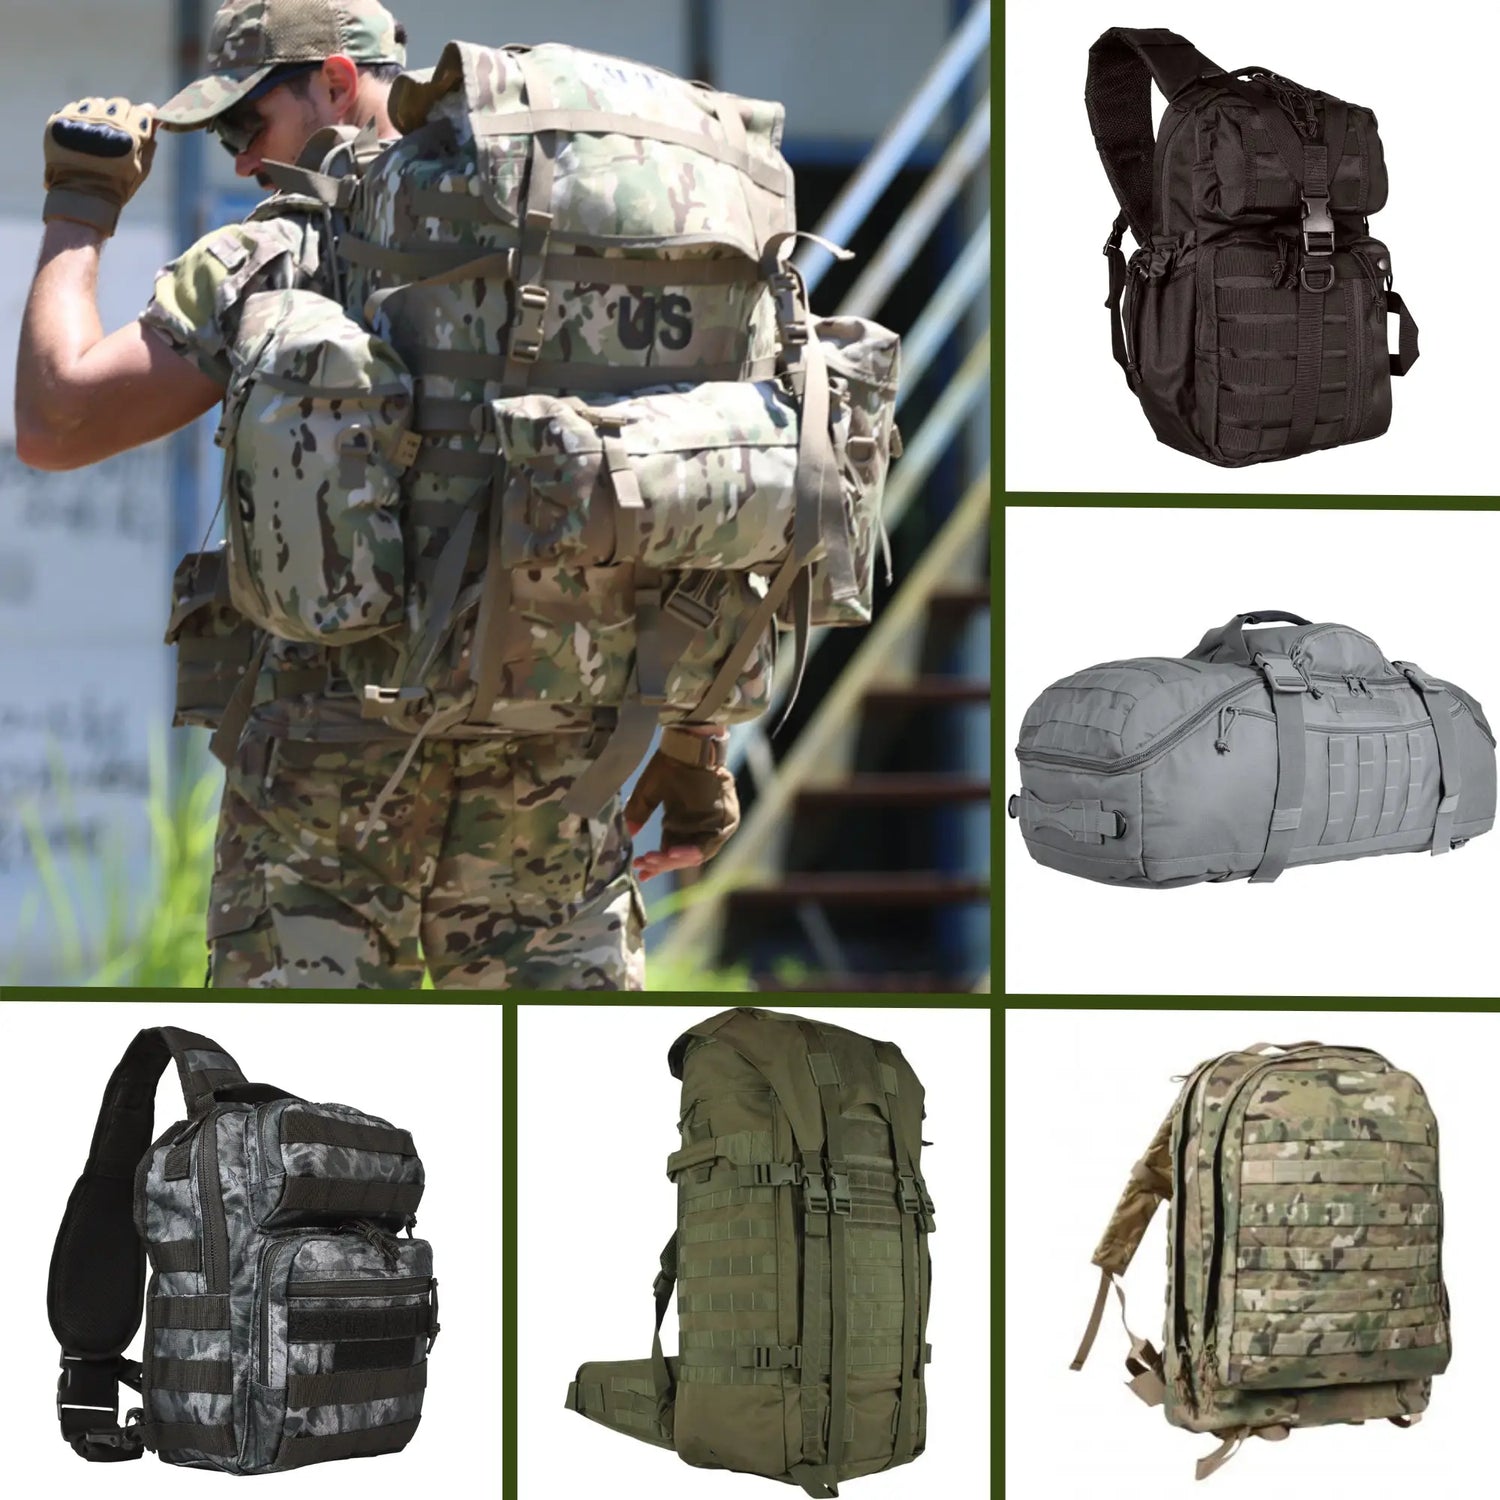 Army Navy Gear, Military Surplus, Tactical & Outdoor Gear